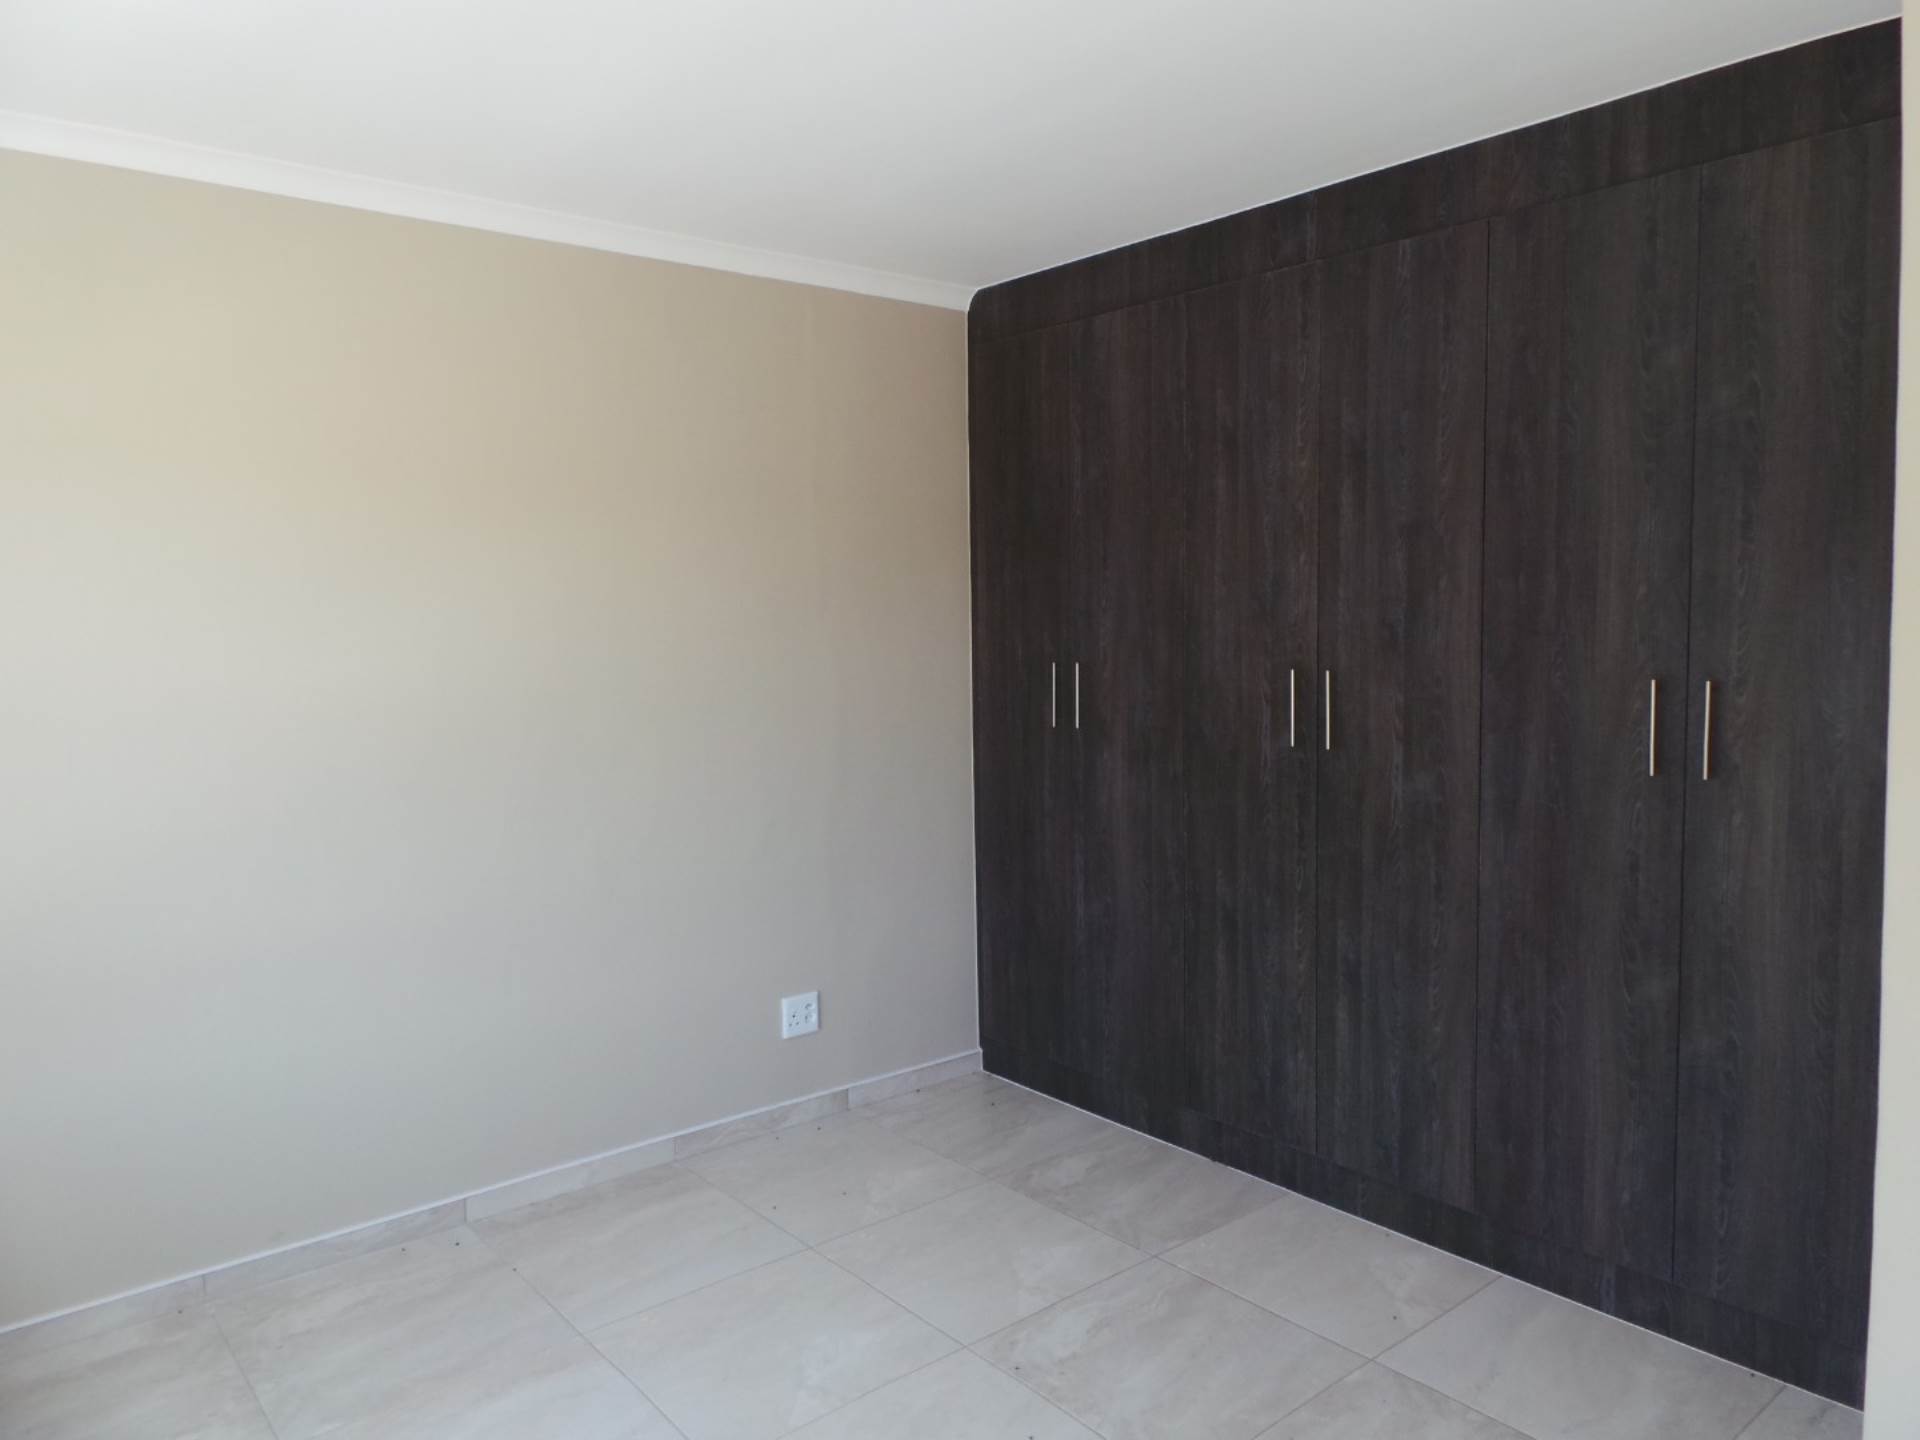 Townhouse For Sale In Otjomuise, Windhoek, Namibia for NAM $ 1,375,000